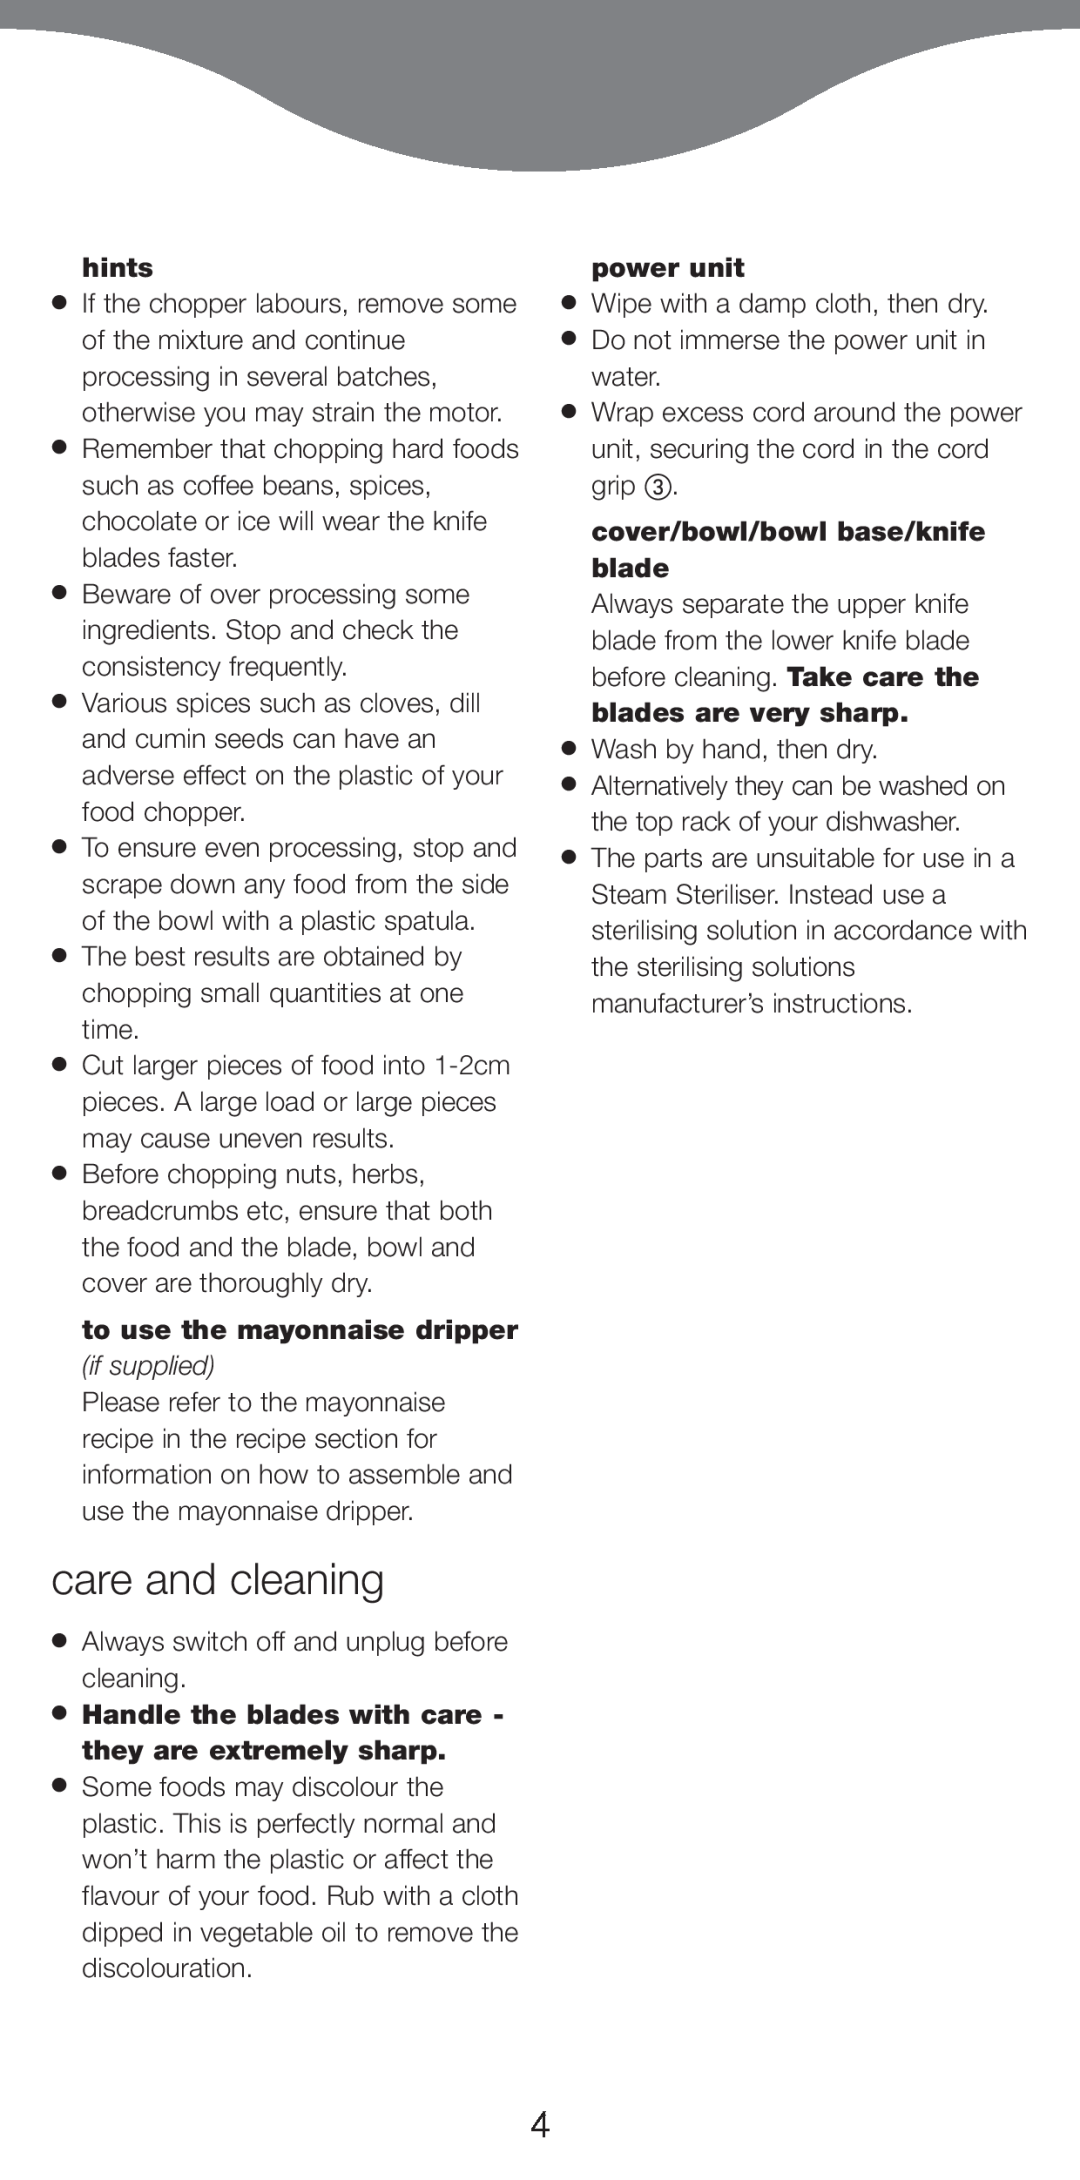 Kenwood CH580 series manual care and cleaning, hints, to use the mayonnaise dripper if supplied, power unit 